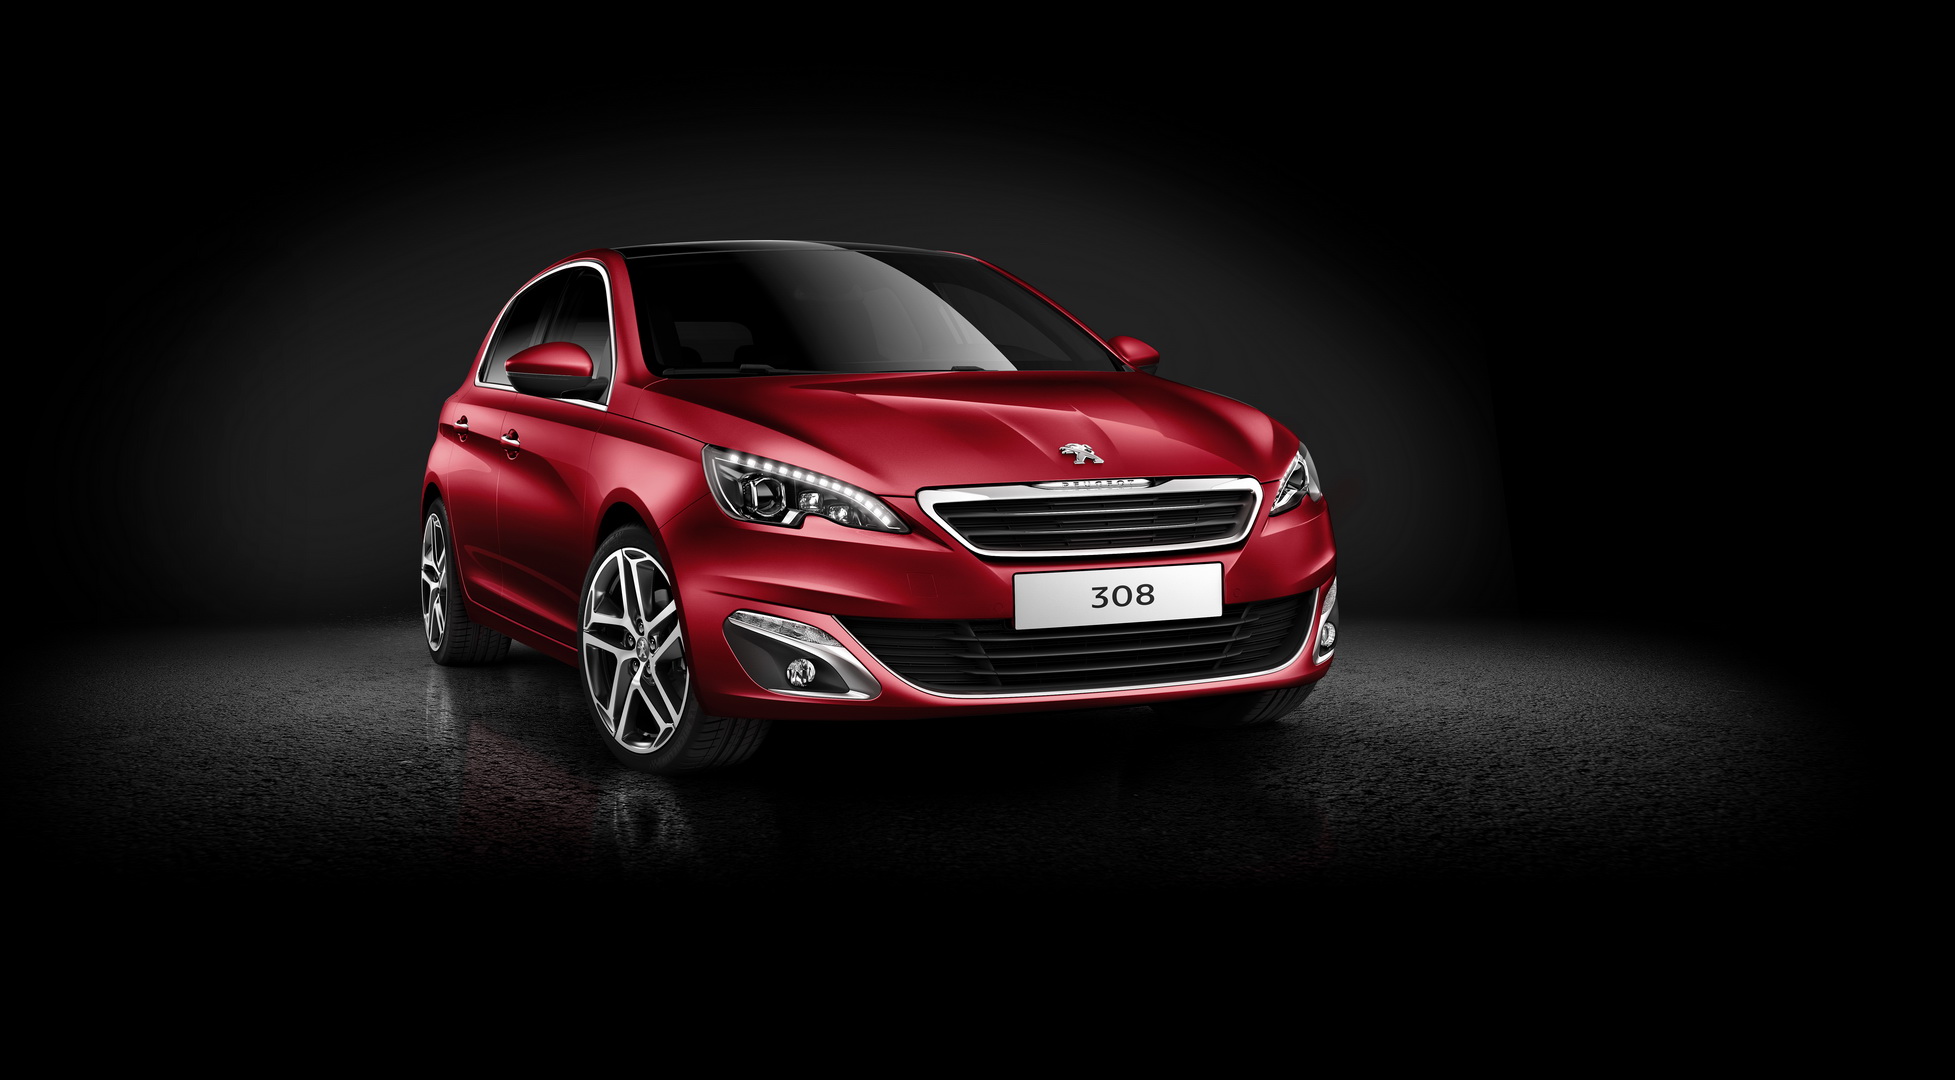 One-Off Tuned Peugeot 308 GTi Has Racing-Inspired Looks, 302 PS